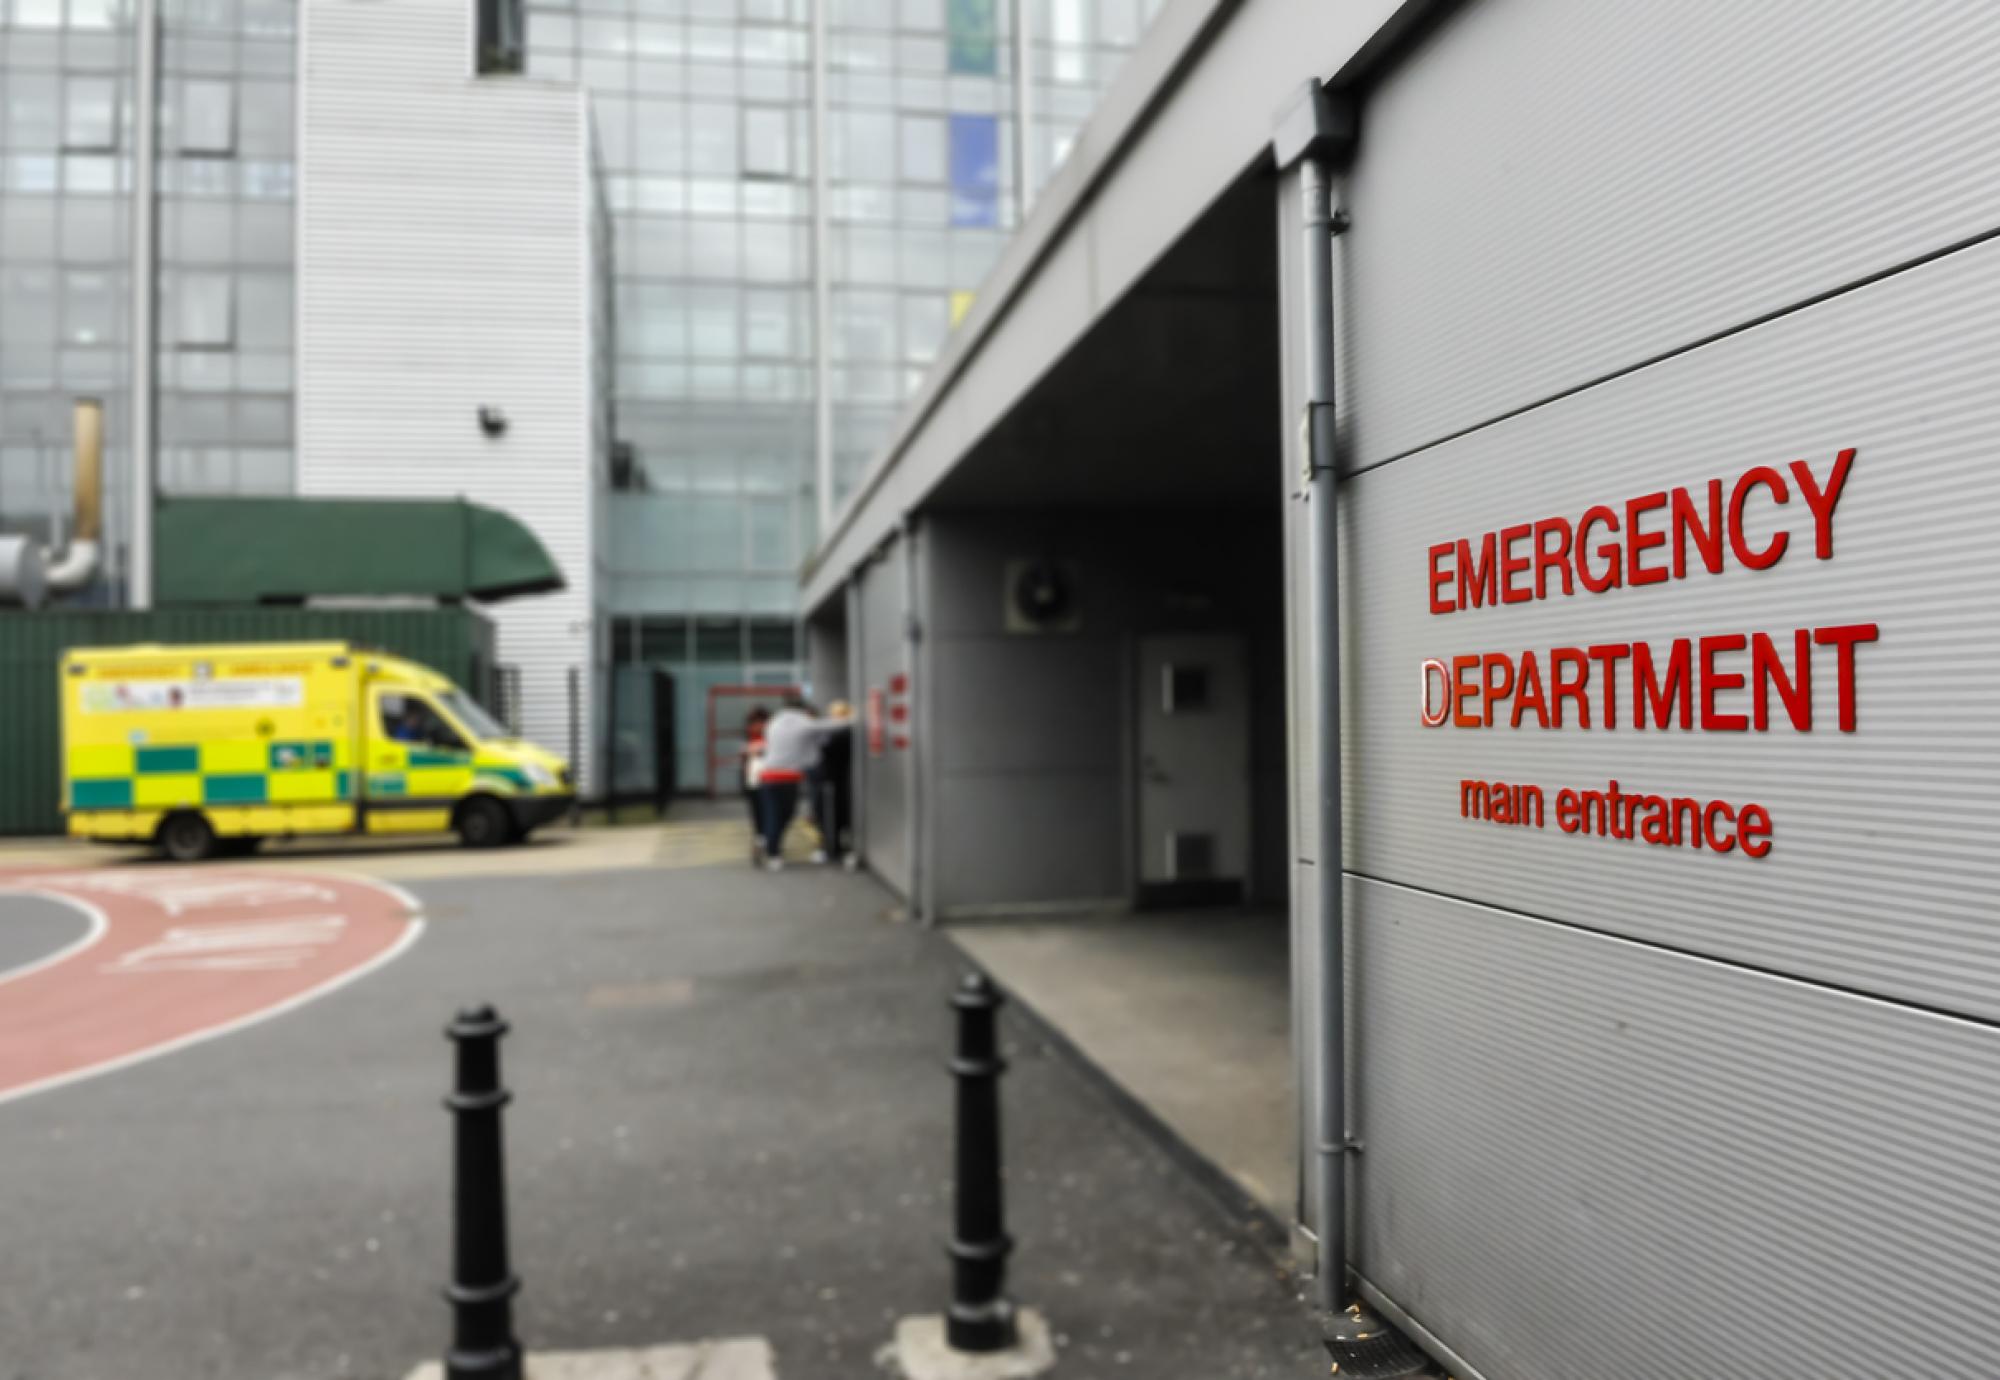 Image of an emergency department sign outside of a hospital